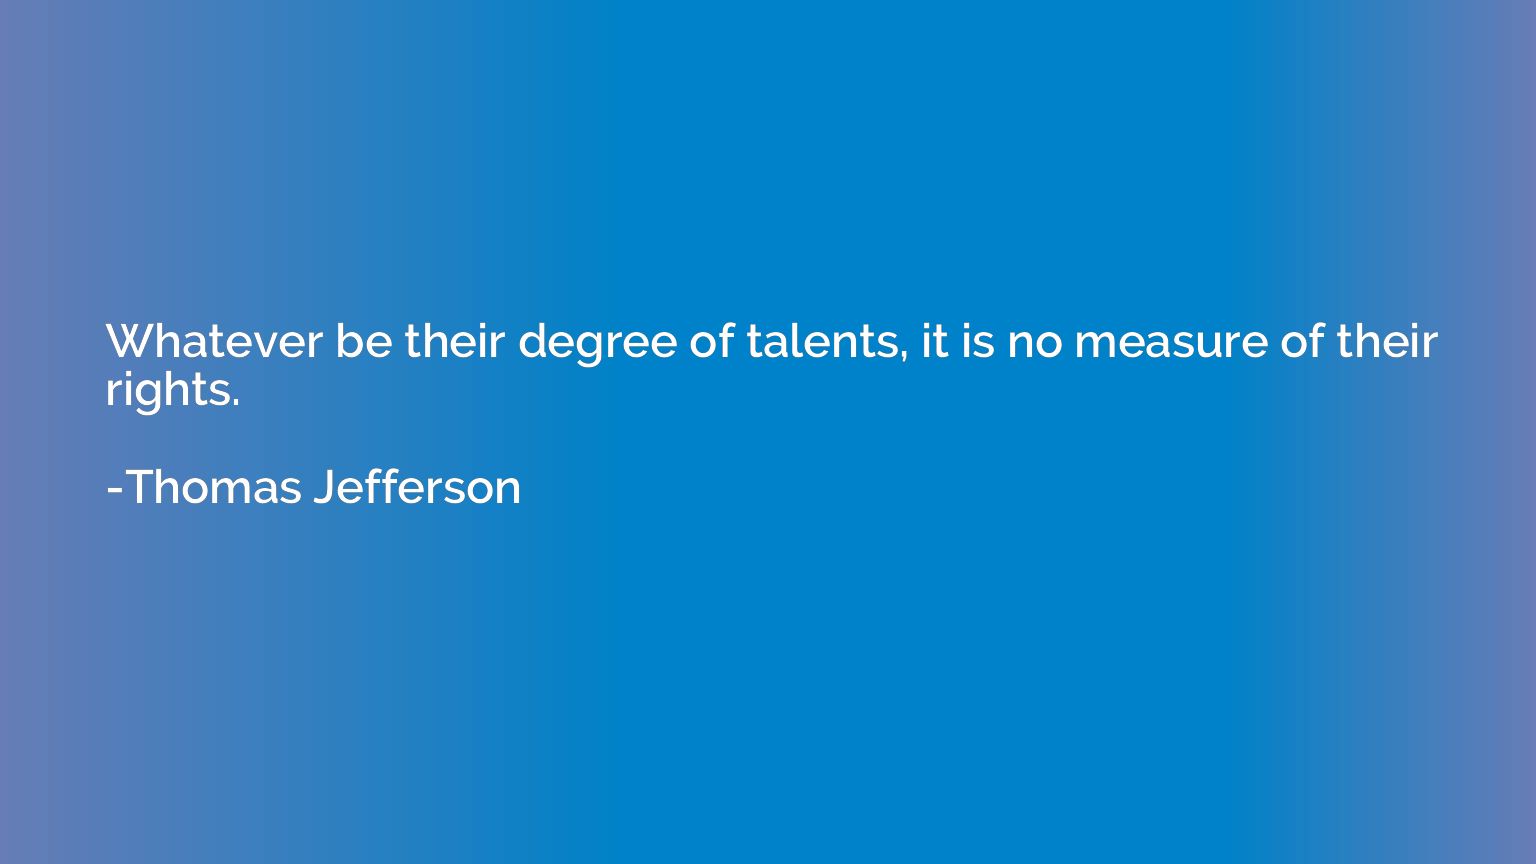 Whatever be their degree of talents, it is no measure of the